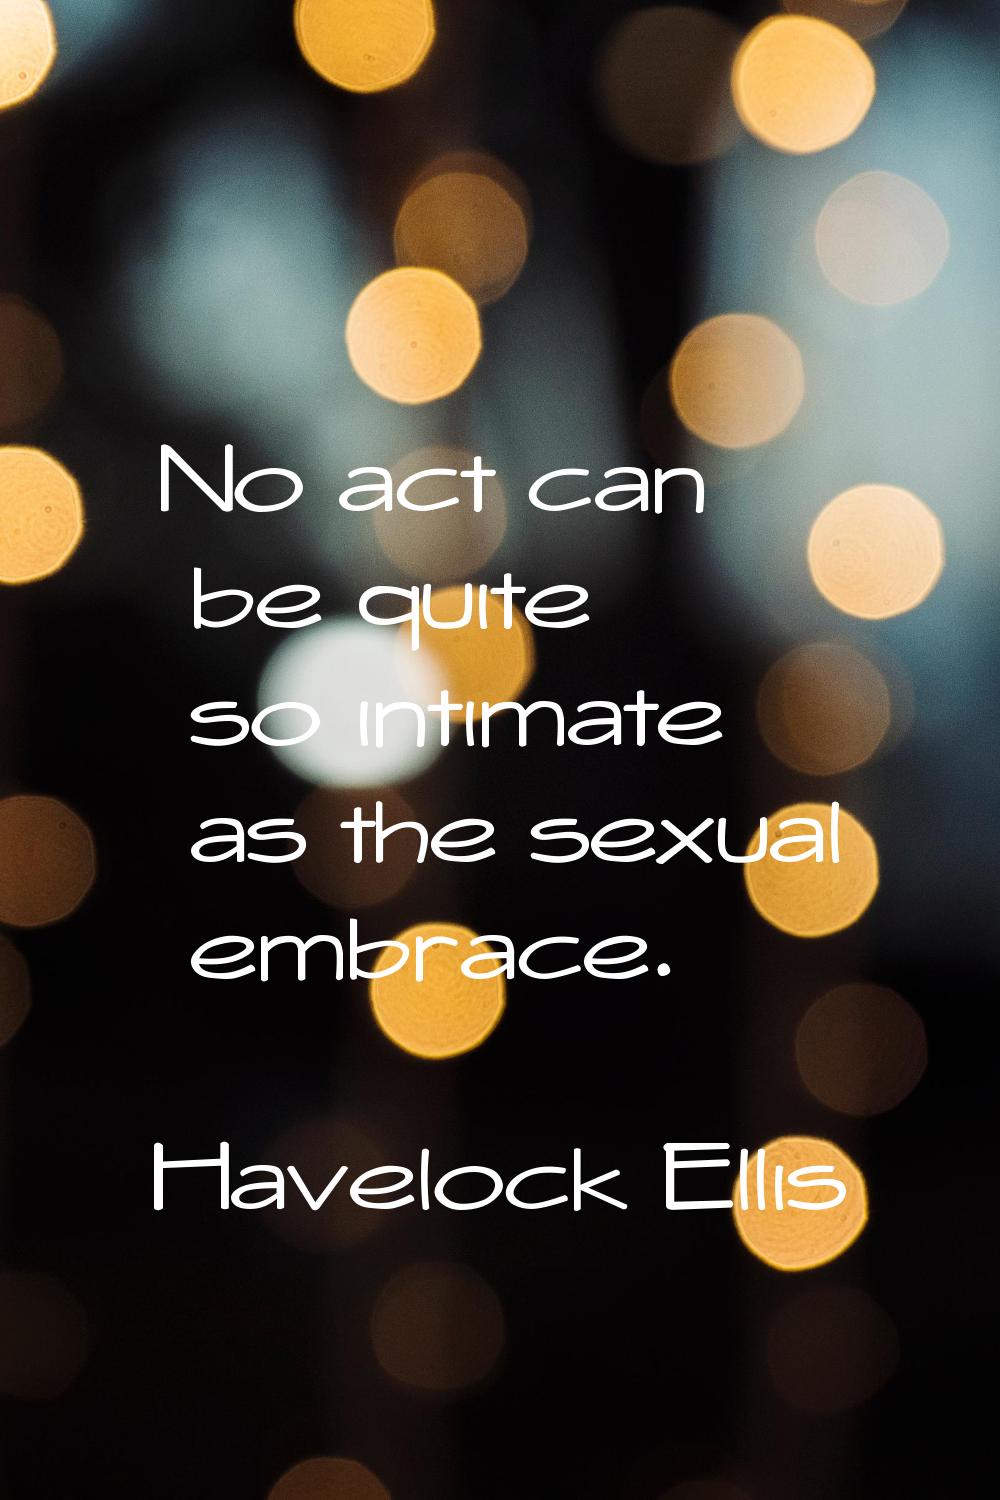 No act can be quite so intimate as the sexual embrace.